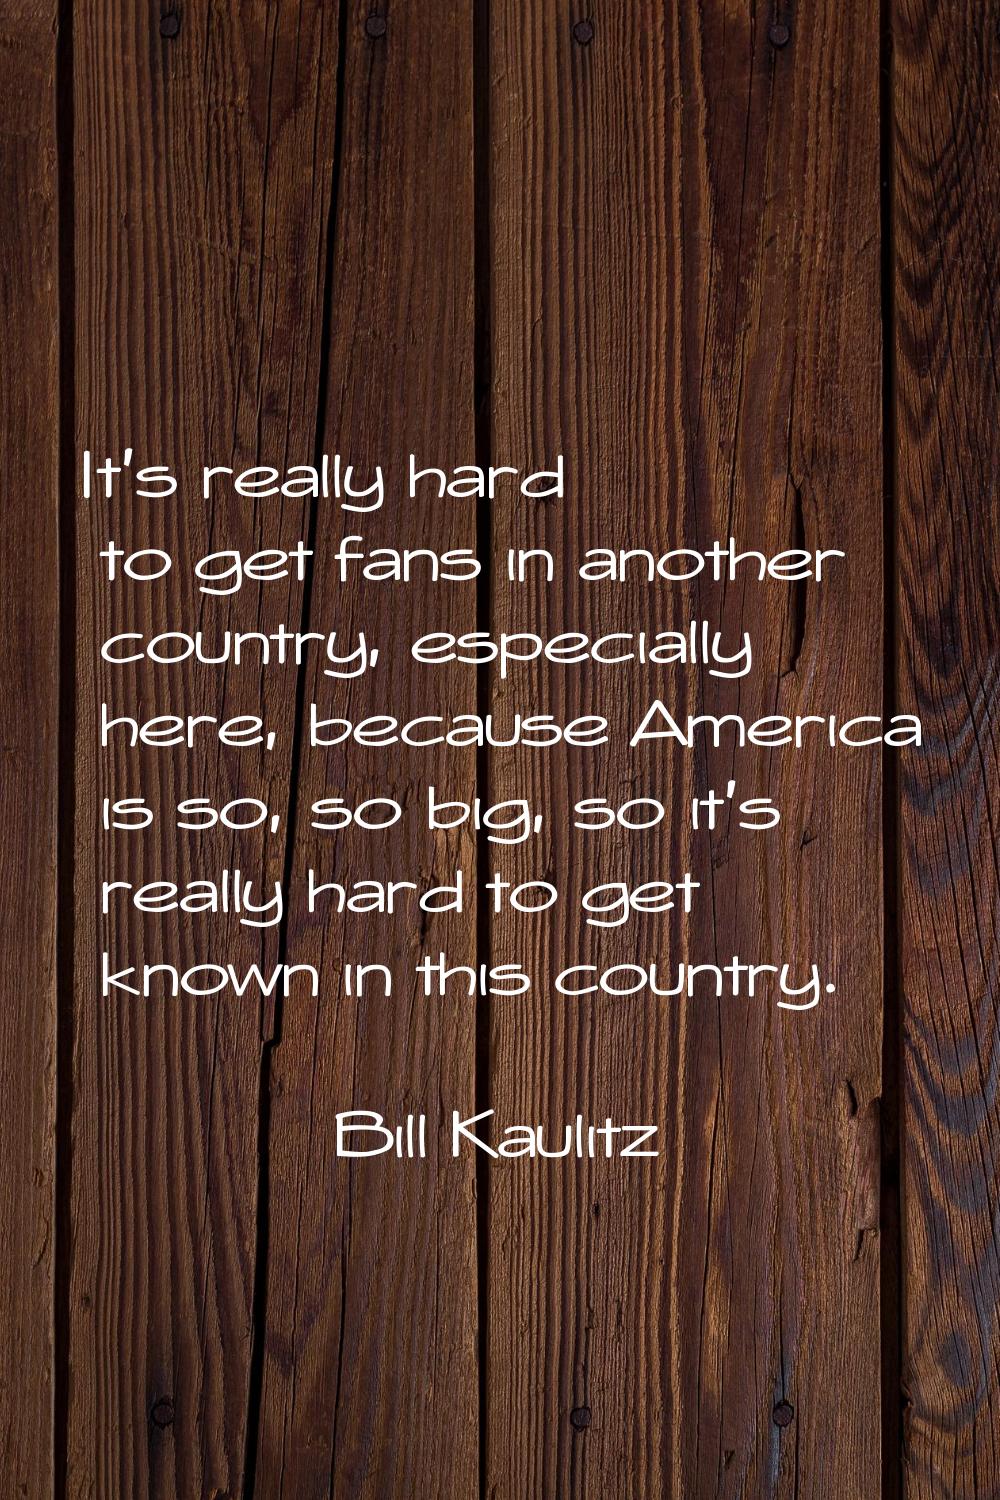 It's really hard to get fans in another country, especially here, because America is so, so big, so